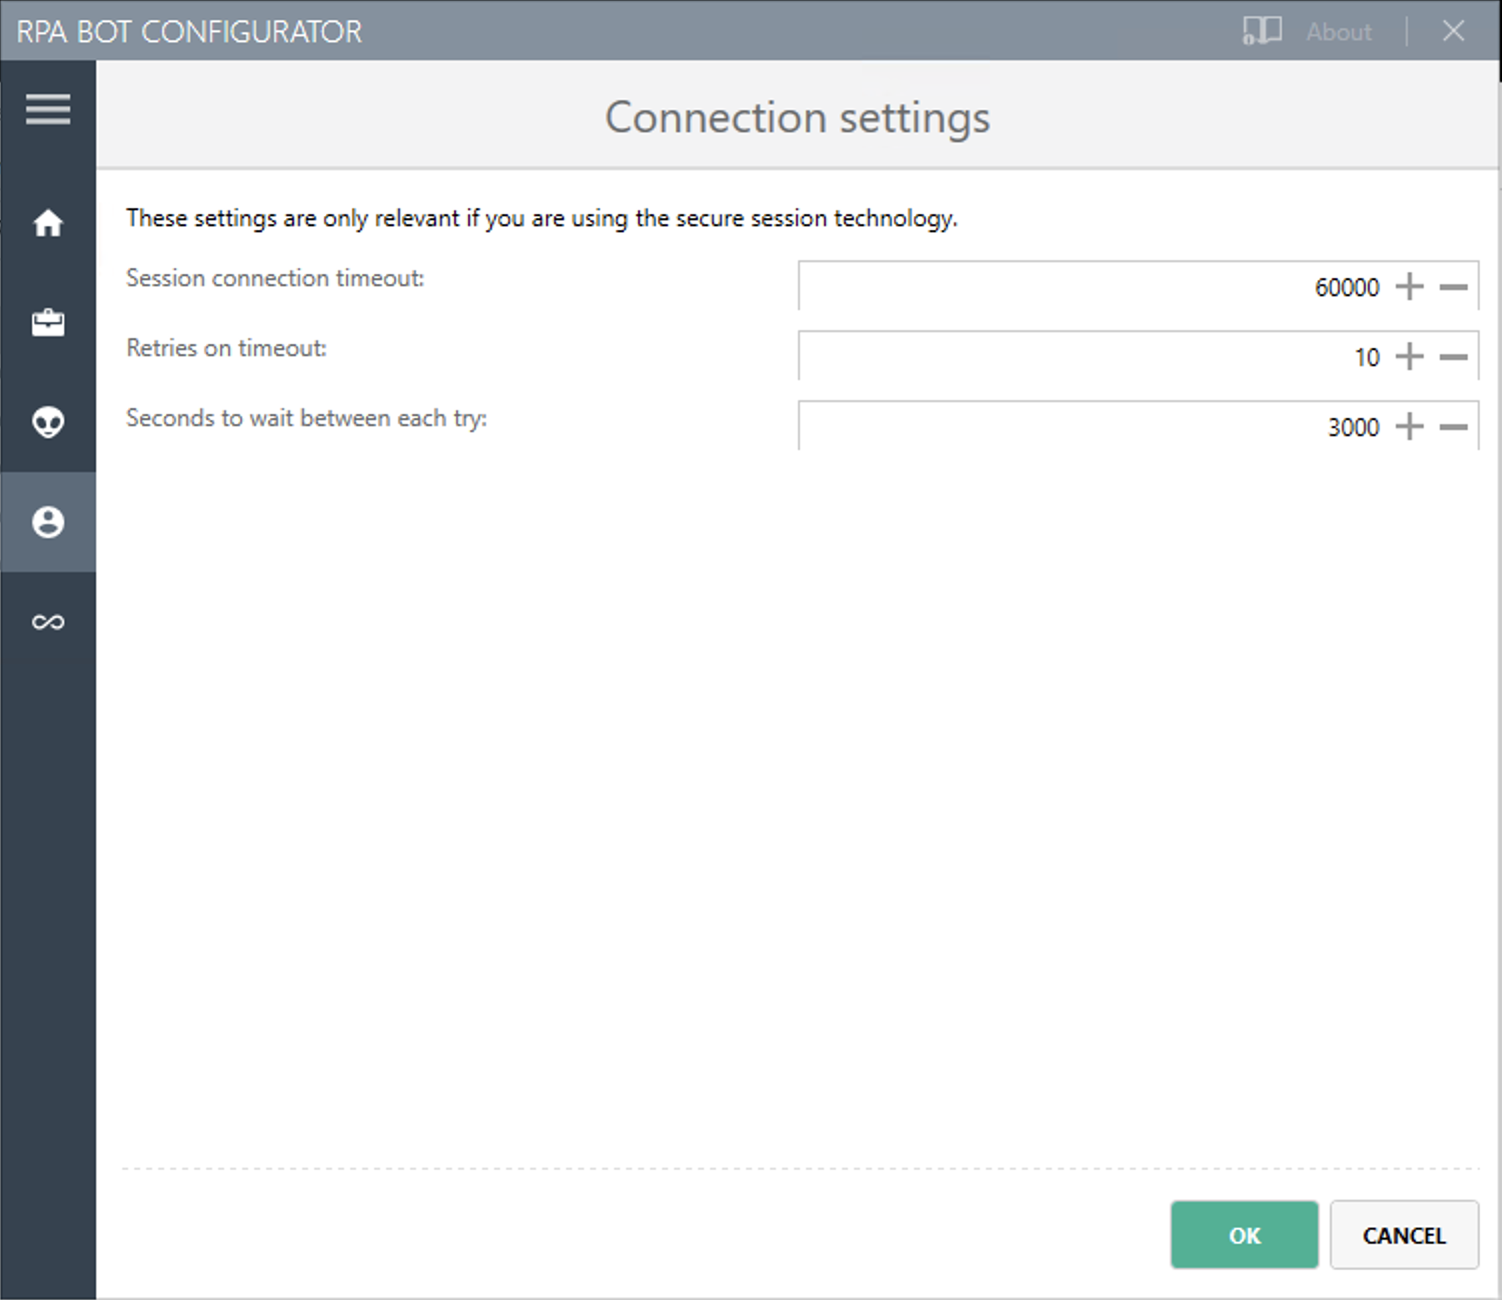 The RPA Bot configurator application showing the Connection settings panel